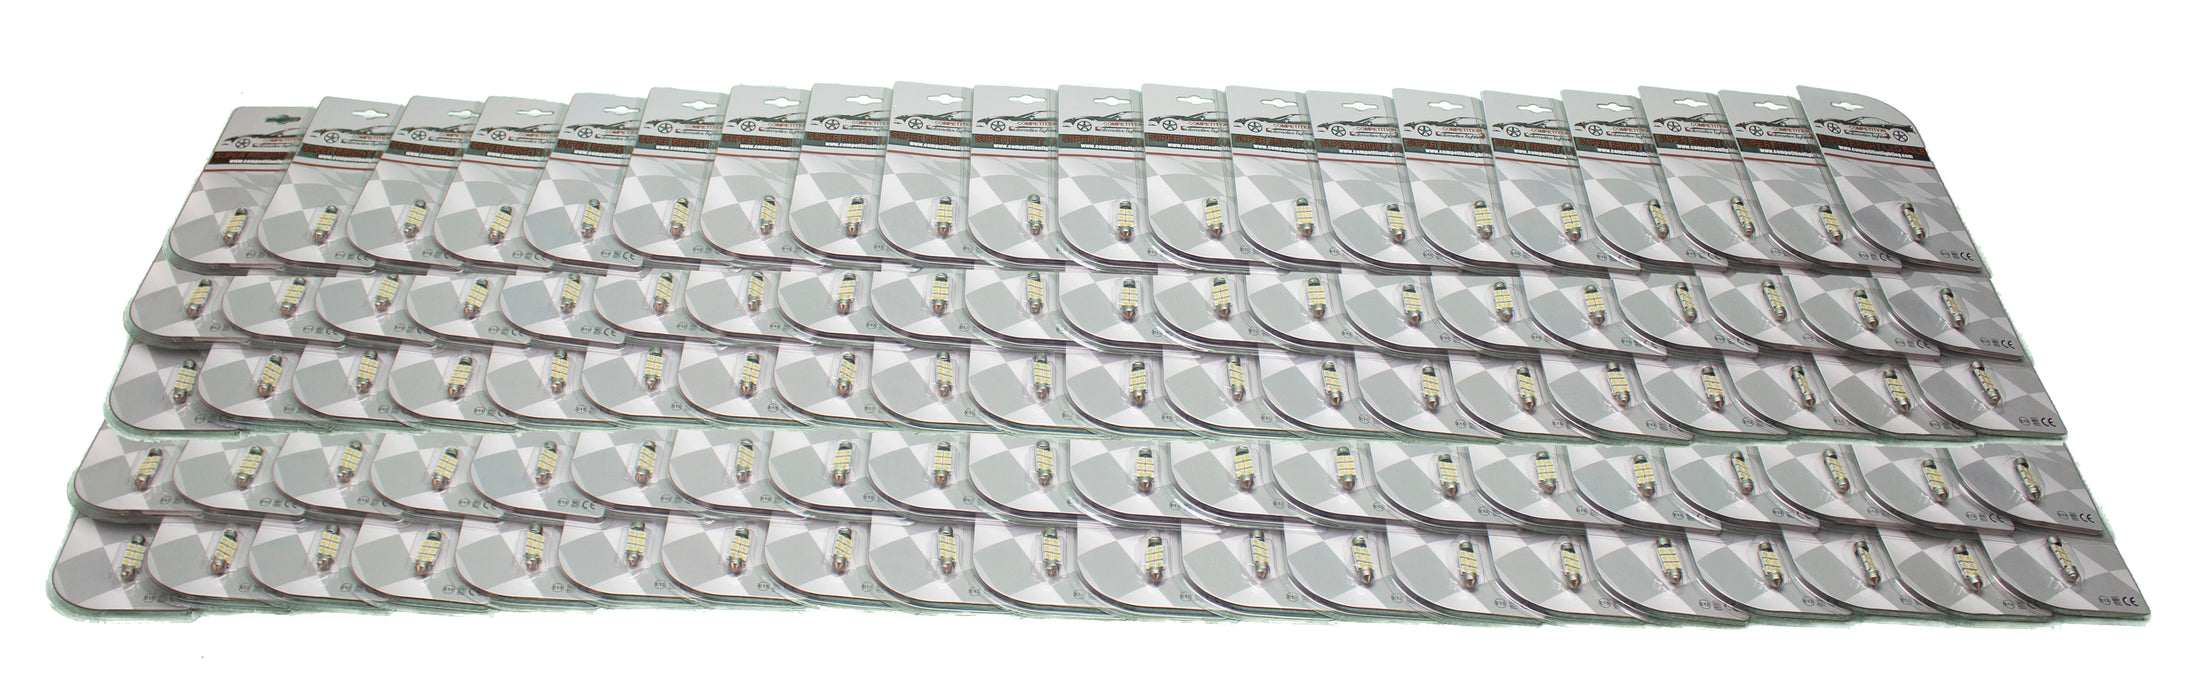 36mm 6SMD 5050 WHITE LED Replacement Bulbs - Bulk Lot of 100 in retail packaging - Festoon Domes each